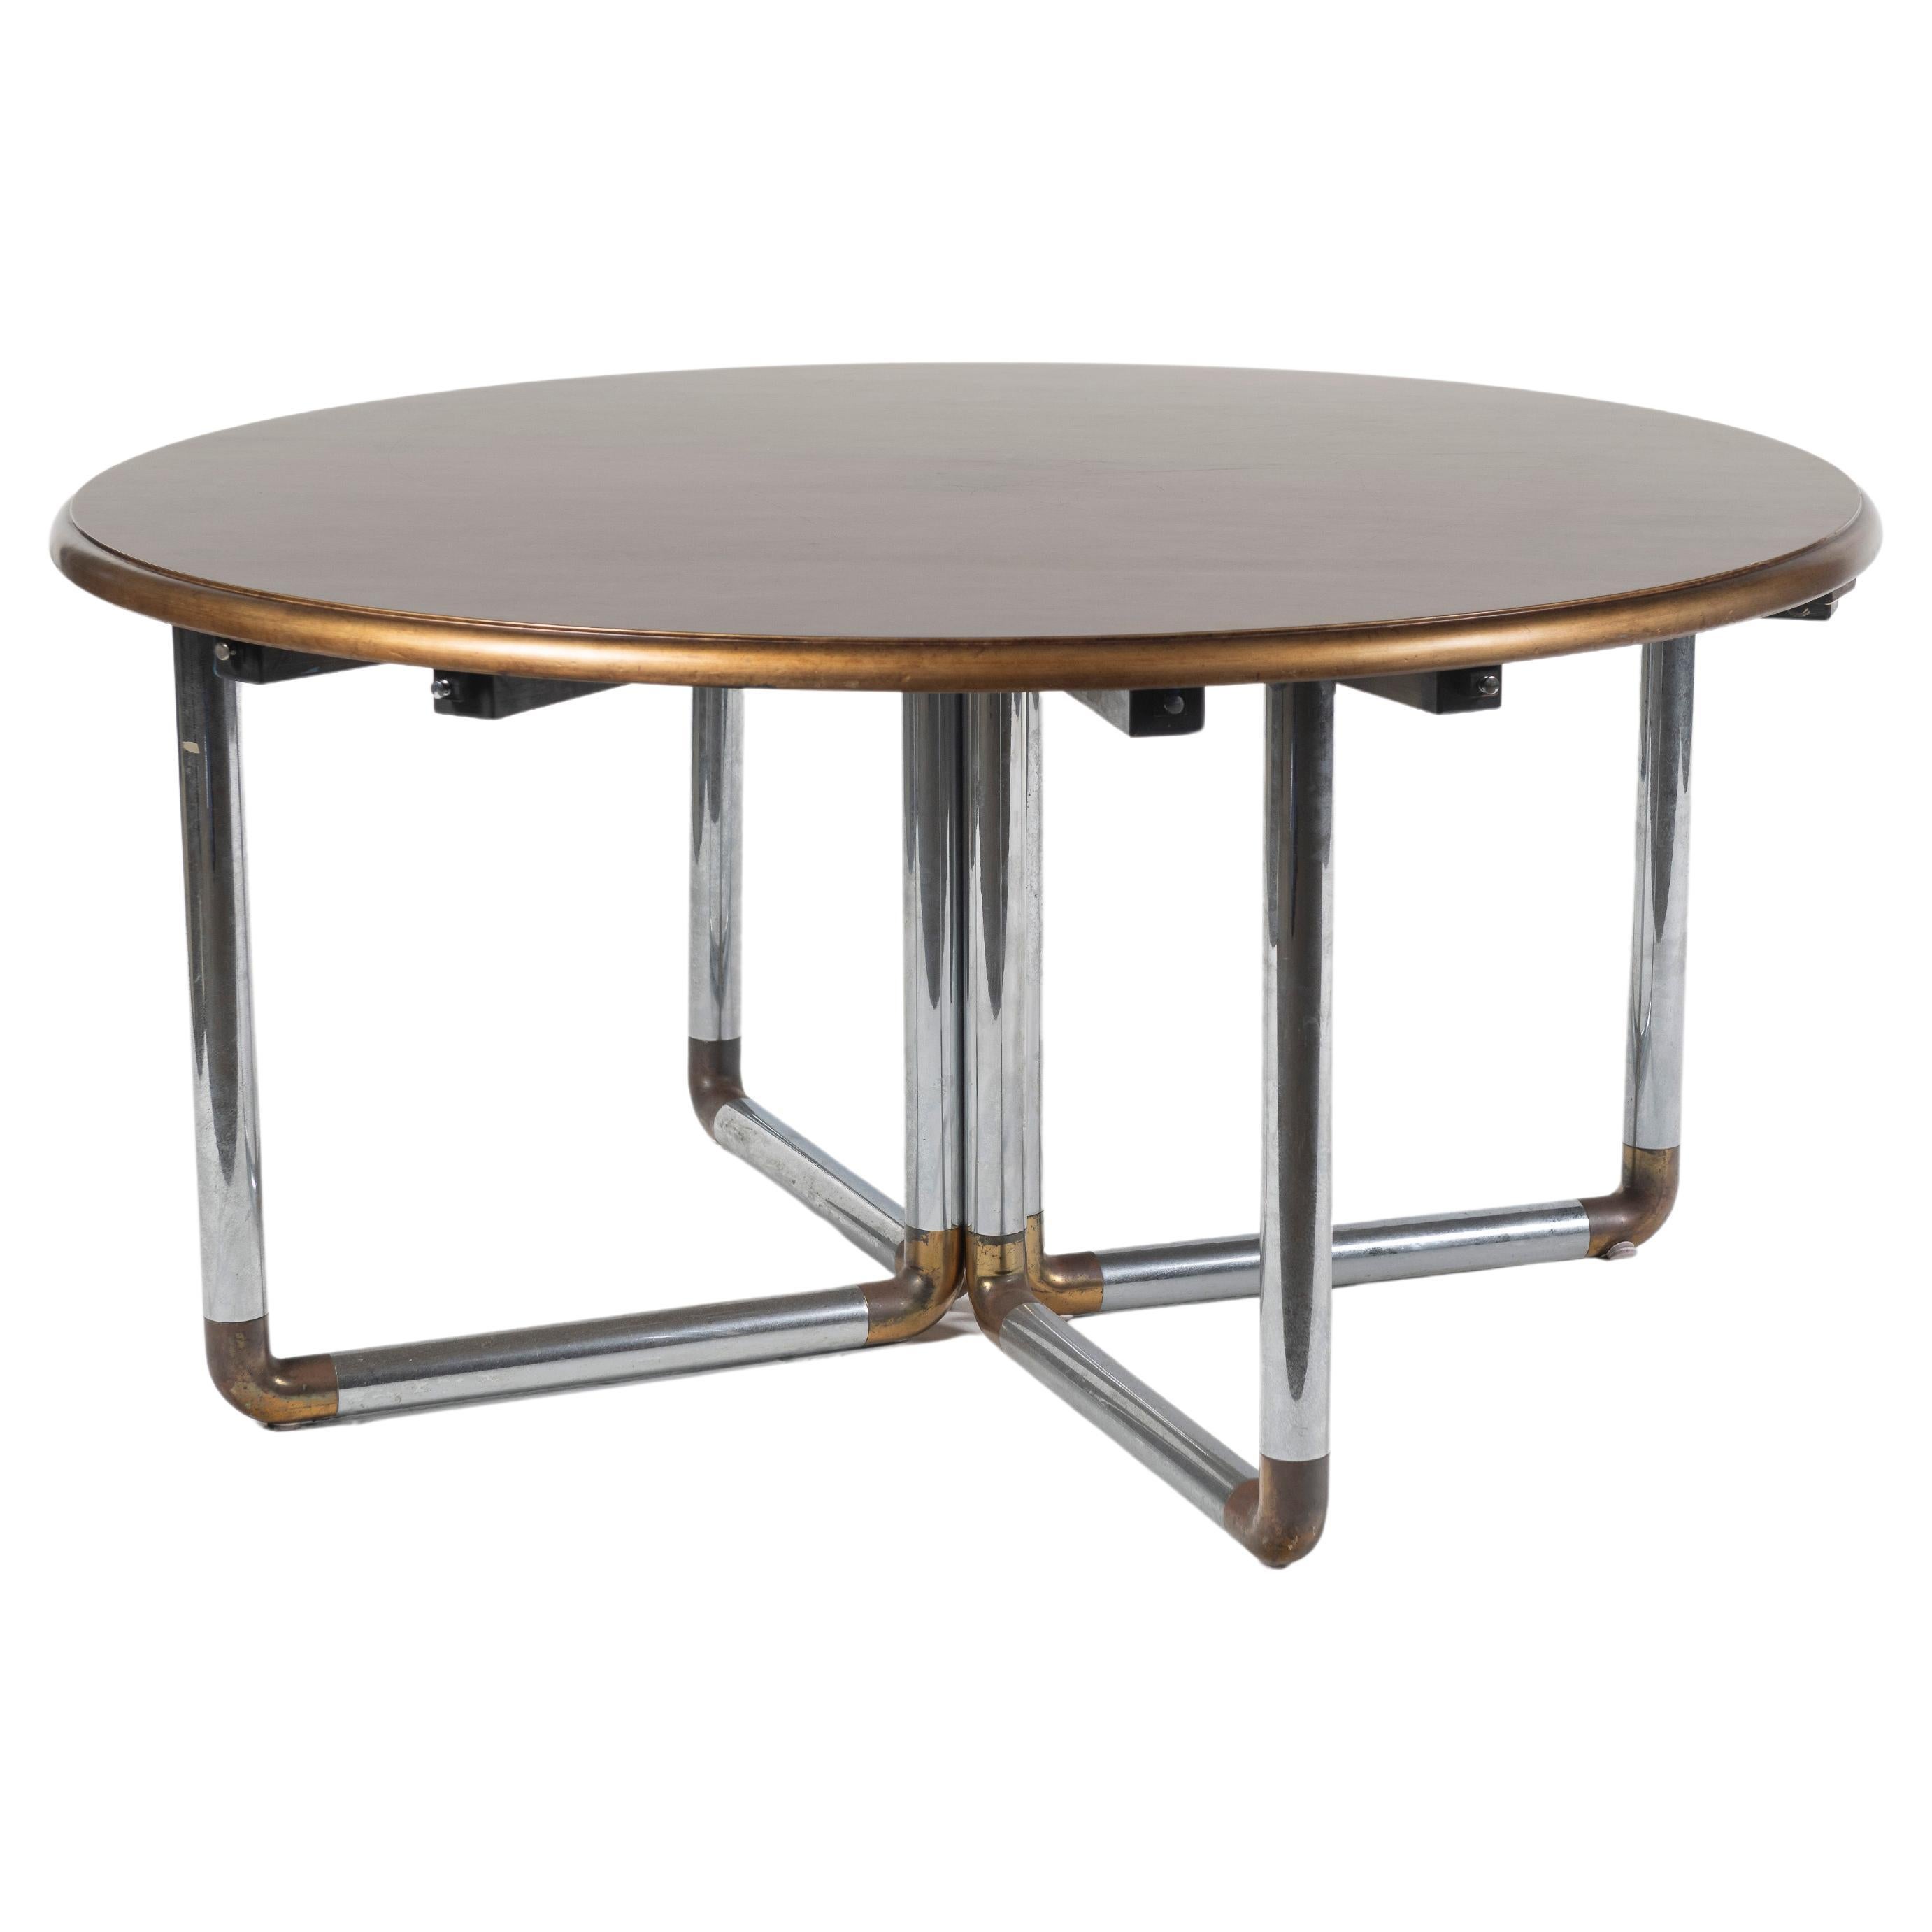 Painted Wood and Chrome Dining Table, Round with Six Leaves For Sale 2